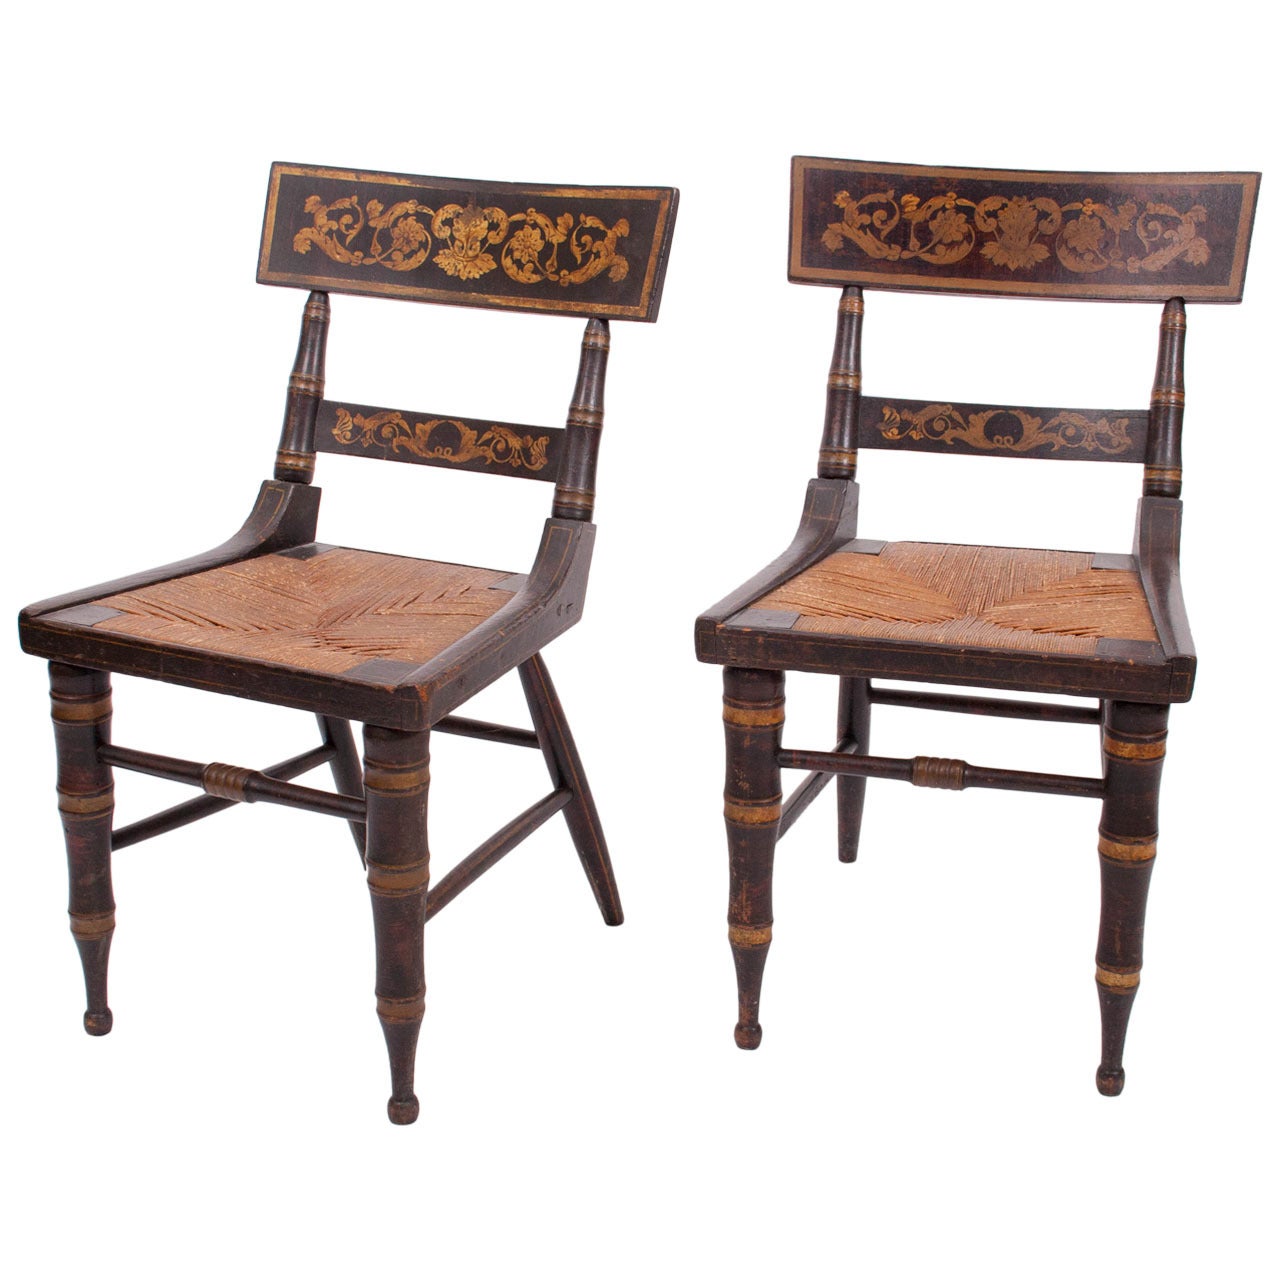 Pair of Faux-Grained and Gilt-Stencilled Klismos Chairs